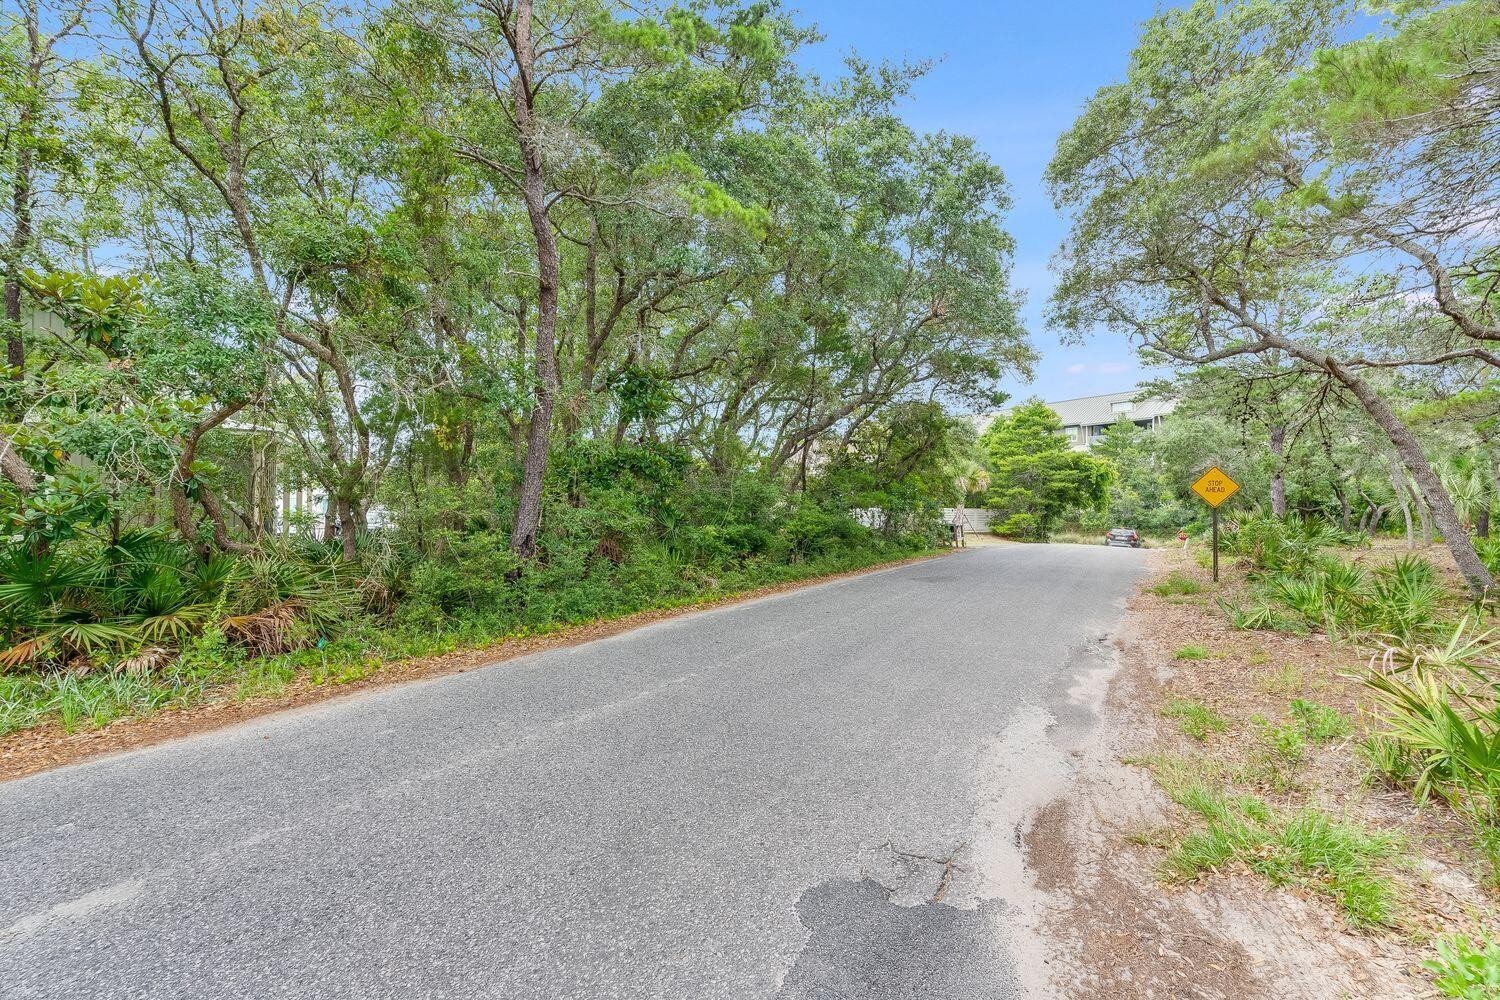 10. Lot13 Gulf Point Road